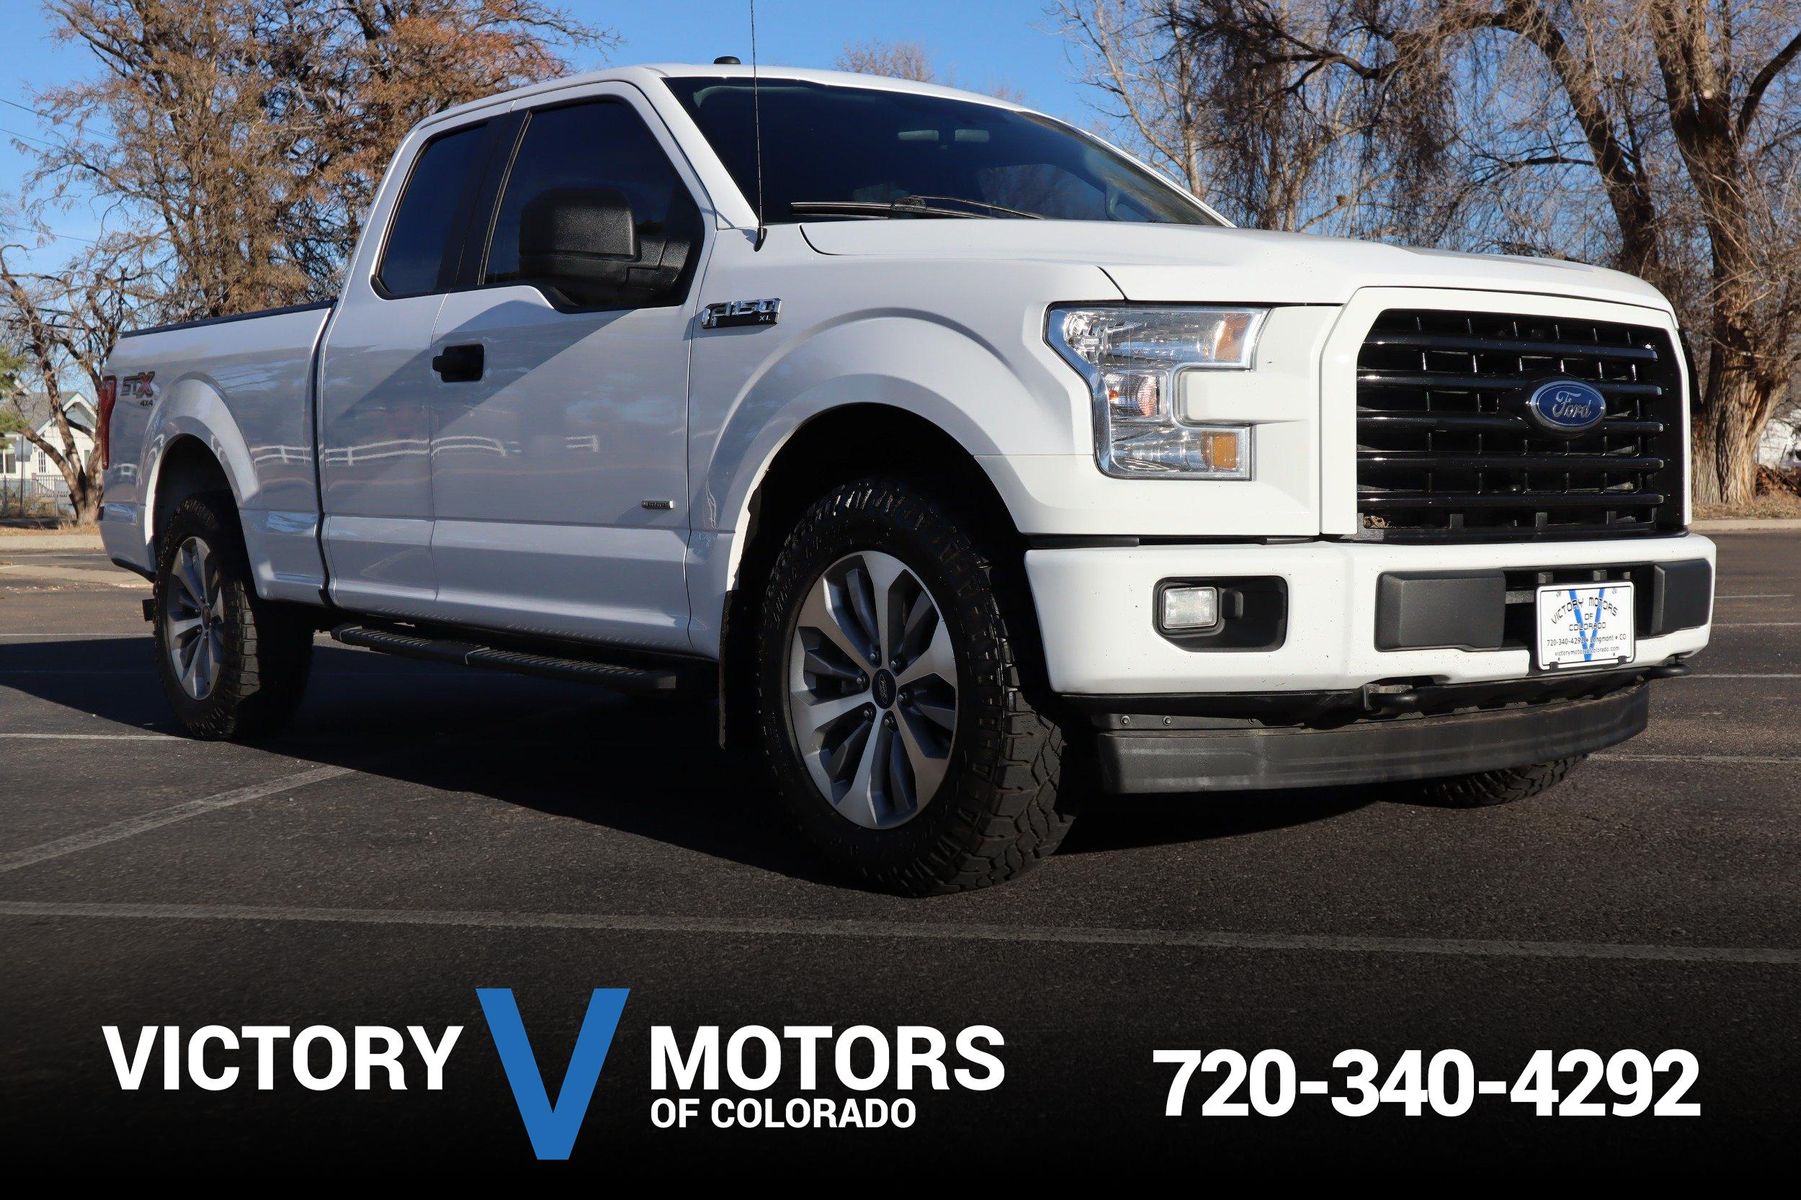 2017 Ford F-150 XLT | Victory Motors of Colorado 2017 Ford F-150 3.5 Ecoboost Towing Capacity